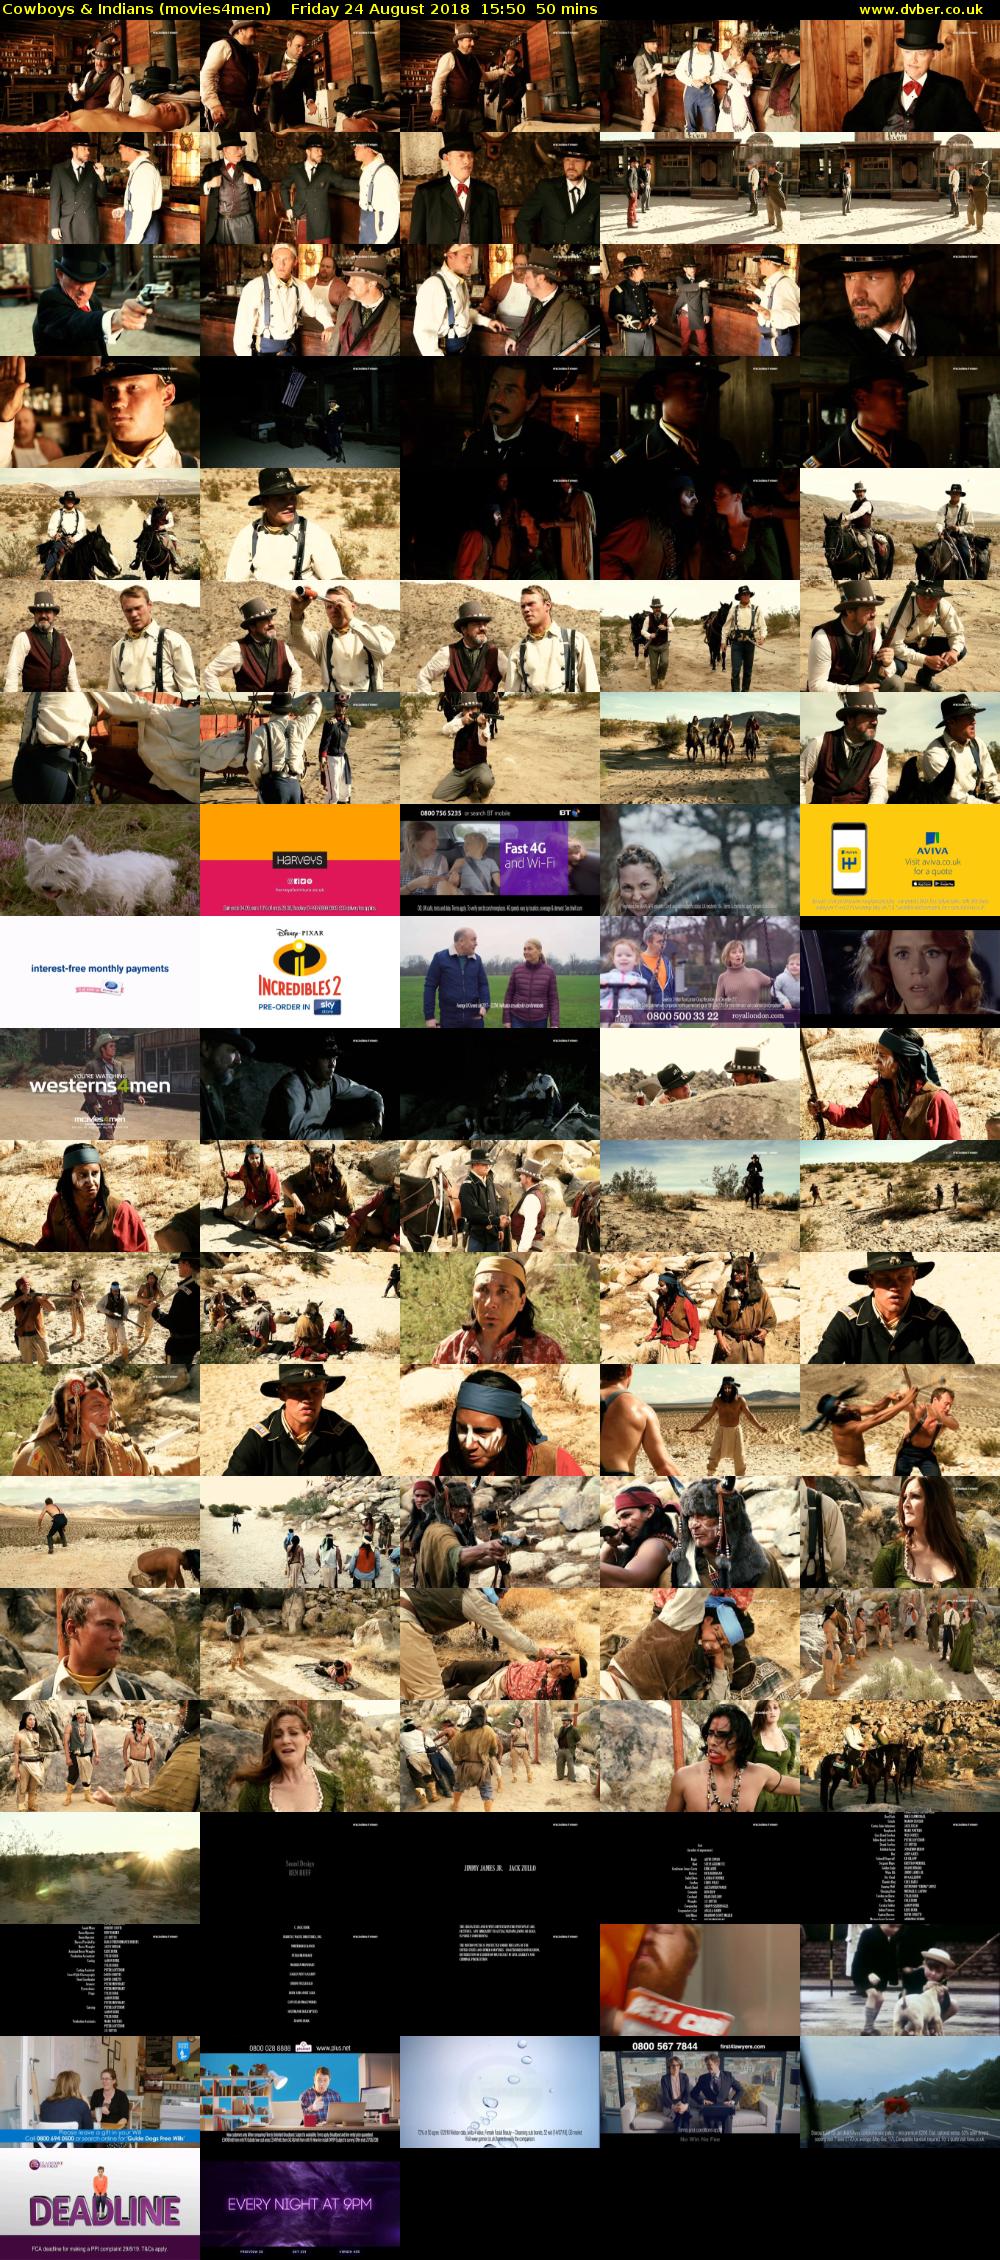 Cowboys & Indians (movies4men) Friday 24 August 2018 15:50 - 16:40